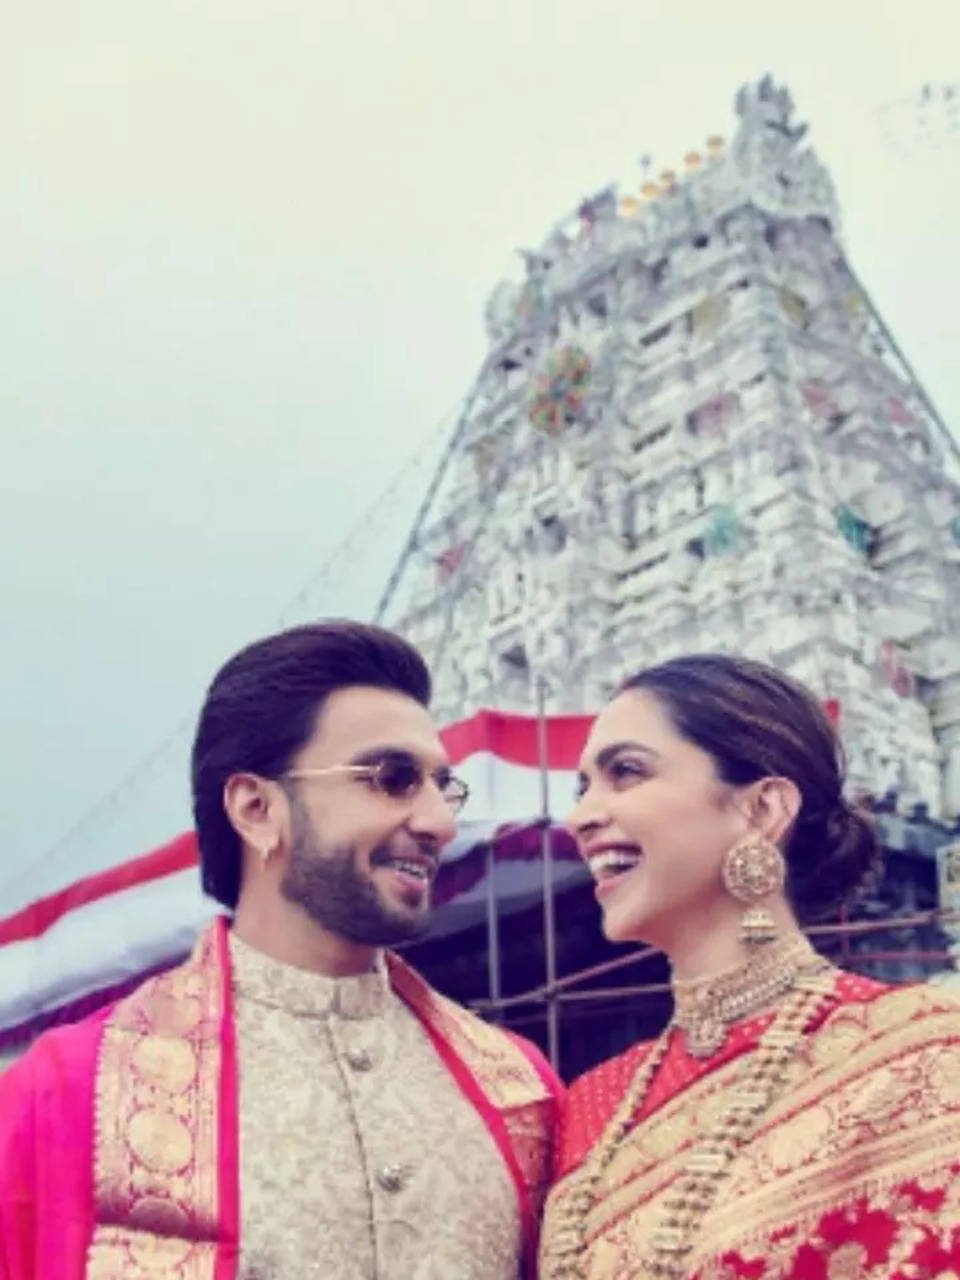 Let's take a look at Deepika Padukone's net worth and all the shiny thing  she owns